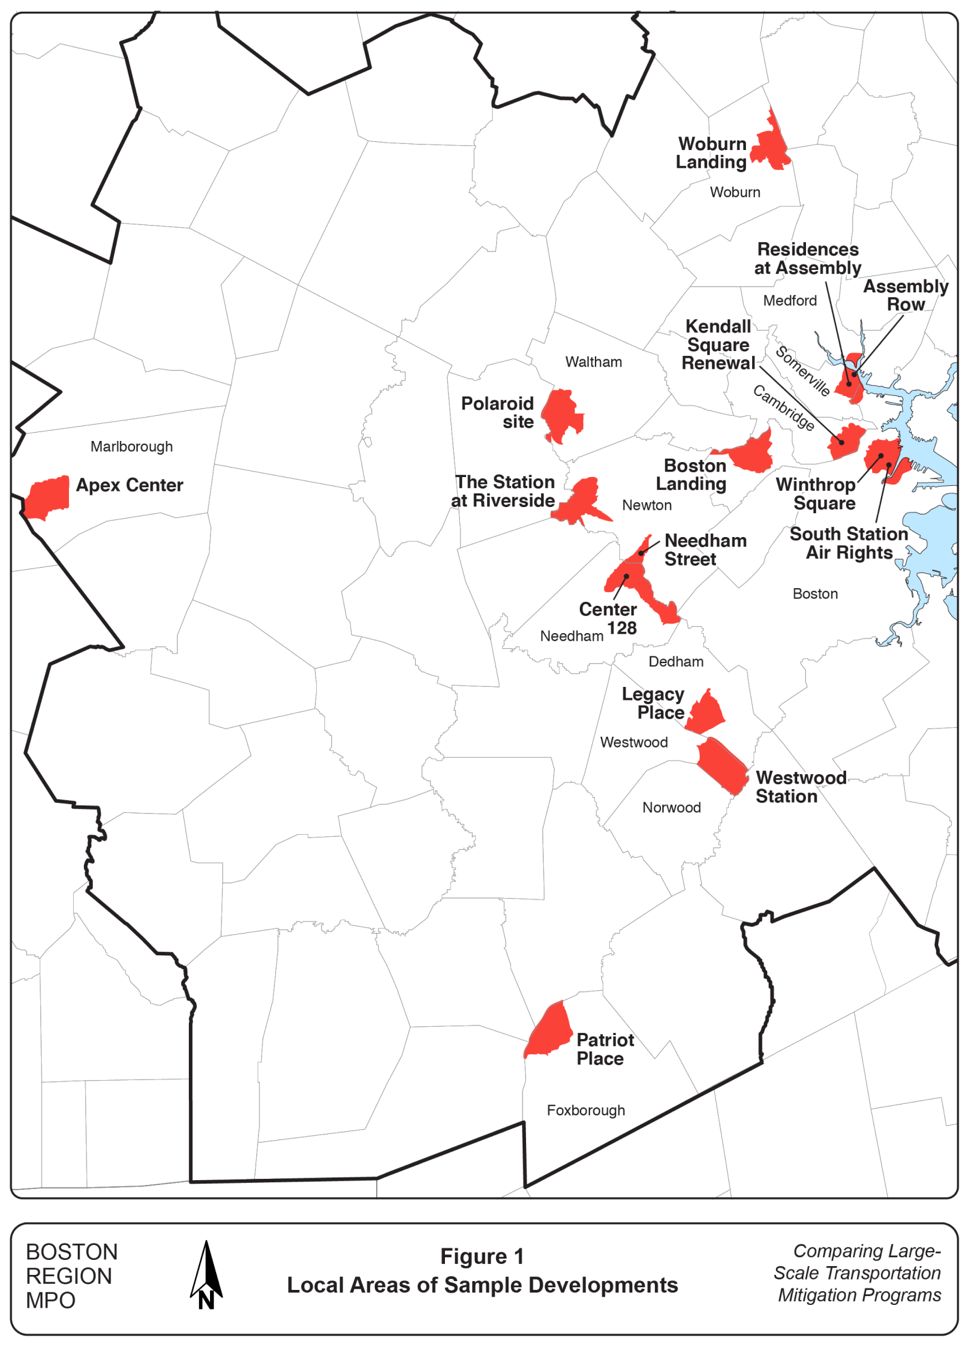 FIGURE 1.
Local Areas of Sample Developments
This figure is a map of a portion of the Boston MPO region. The 12 municipalities in which the 16 sample developments are located are labeled. The traffic analysis zones that comprise the local areas of the developments are shaded in red.
